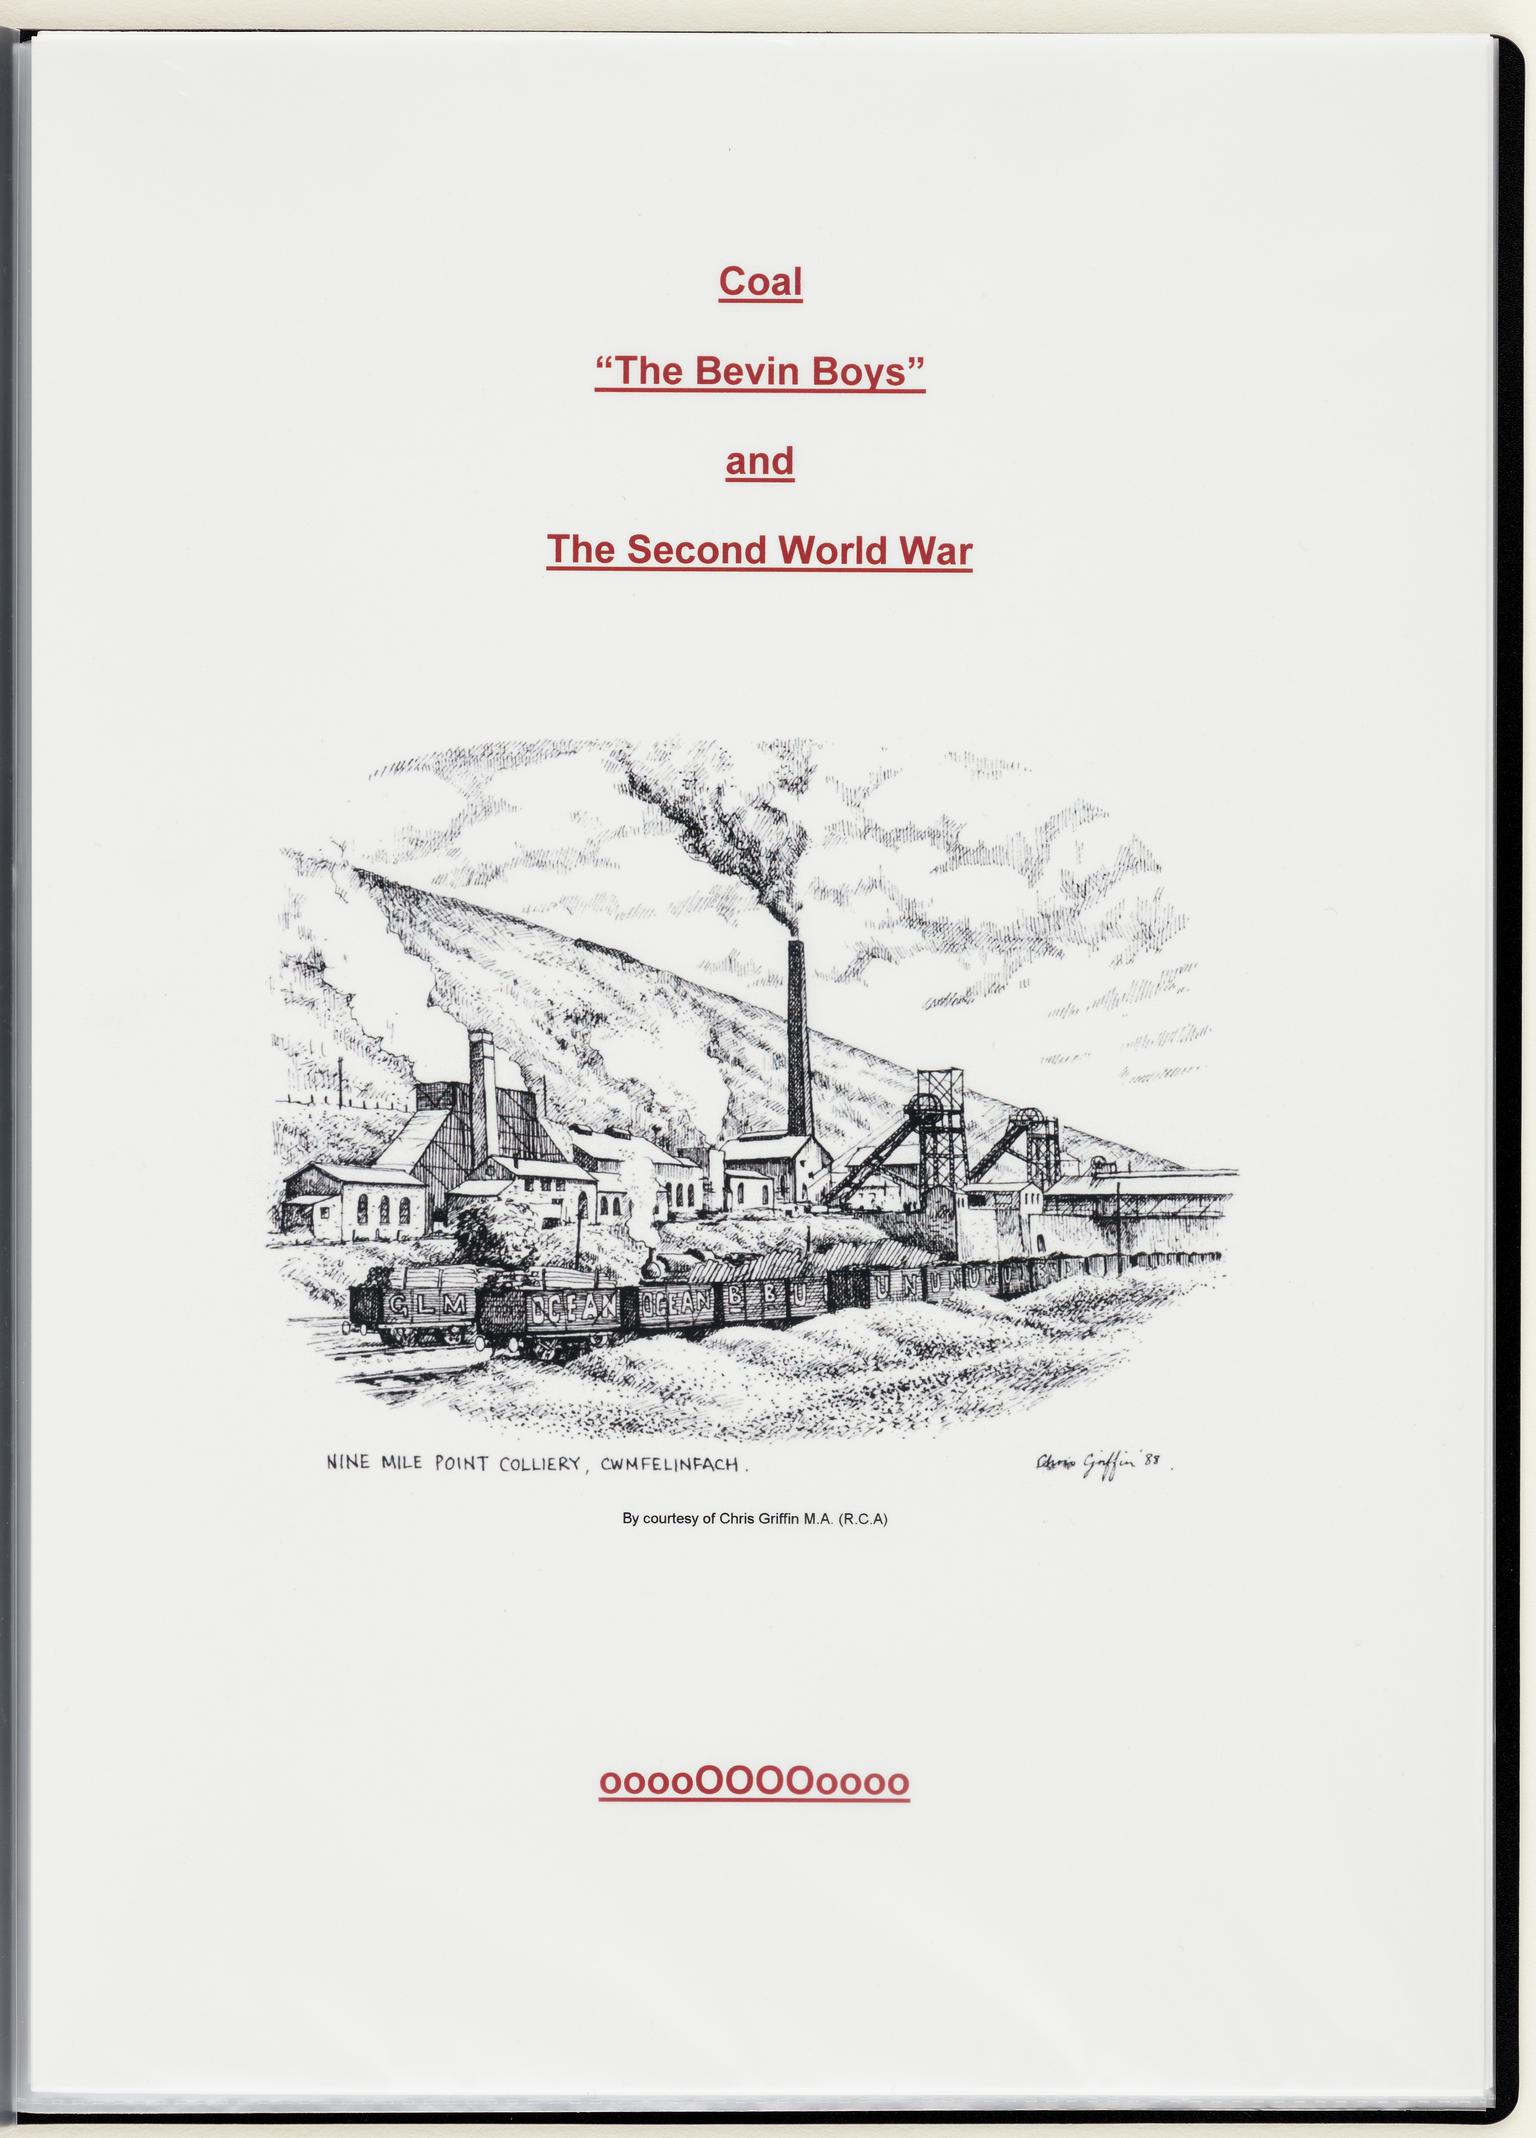 Coal "The Bevin Boys" and the Second World War (article)